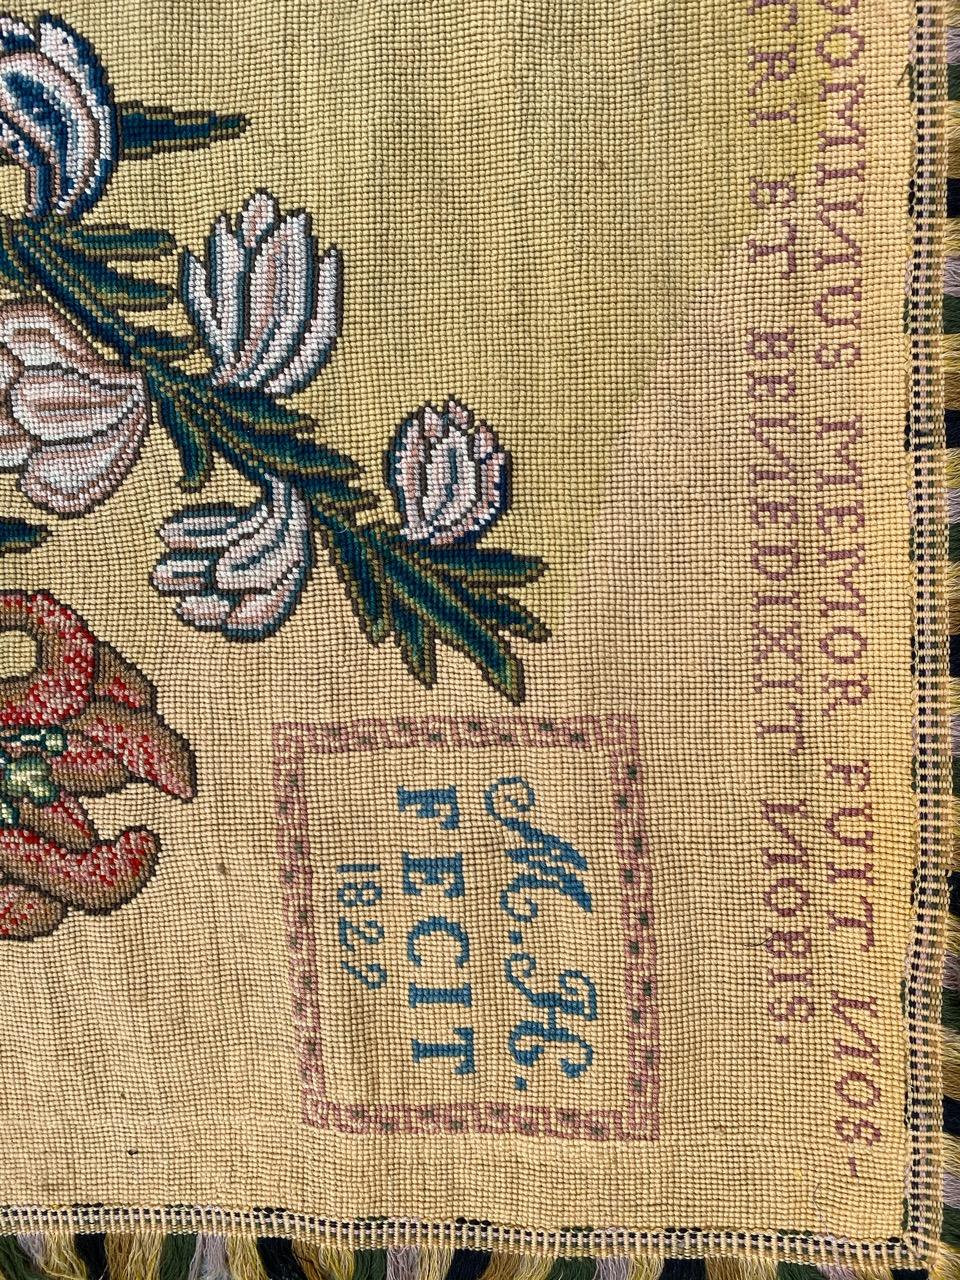 Very beautiful needlepoint French tapestry with very nice floral design and beautiful natural colors, very decorative, entirely hand embroidered with needlepoint method with wool and silk.